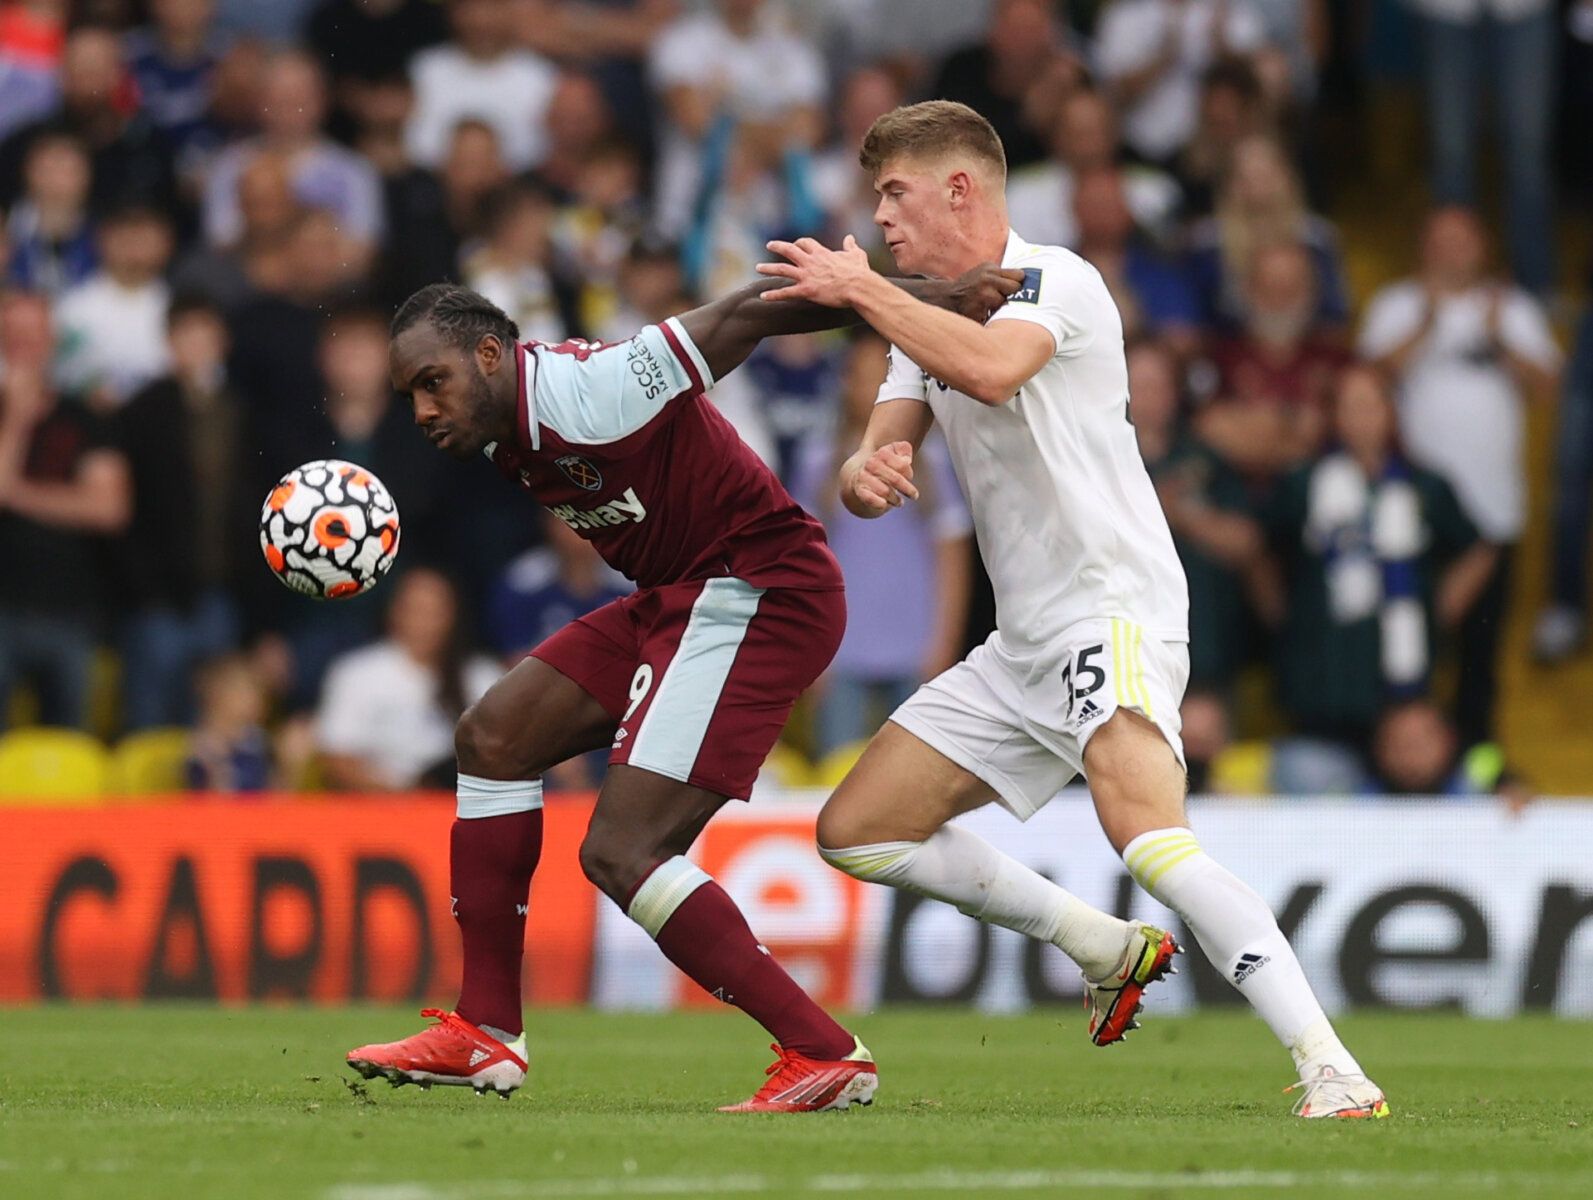 Soccer Football - Premier League - Leeds United v West Ham United - Elland Road, Leeds, Britain - September 25, 2021  West Ham United's Michail Antonio in action with Leeds United's Charlie Cresswell Action Images via Reuters/Lee Smith EDITORIAL USE ONLY. No use with unauthorized audio, video, data, fixture lists, club/league logos or 'live' services. Online in-match use limited to 75 images, no video emulation. No use in betting, games or single club /league/player publications.  Please contact